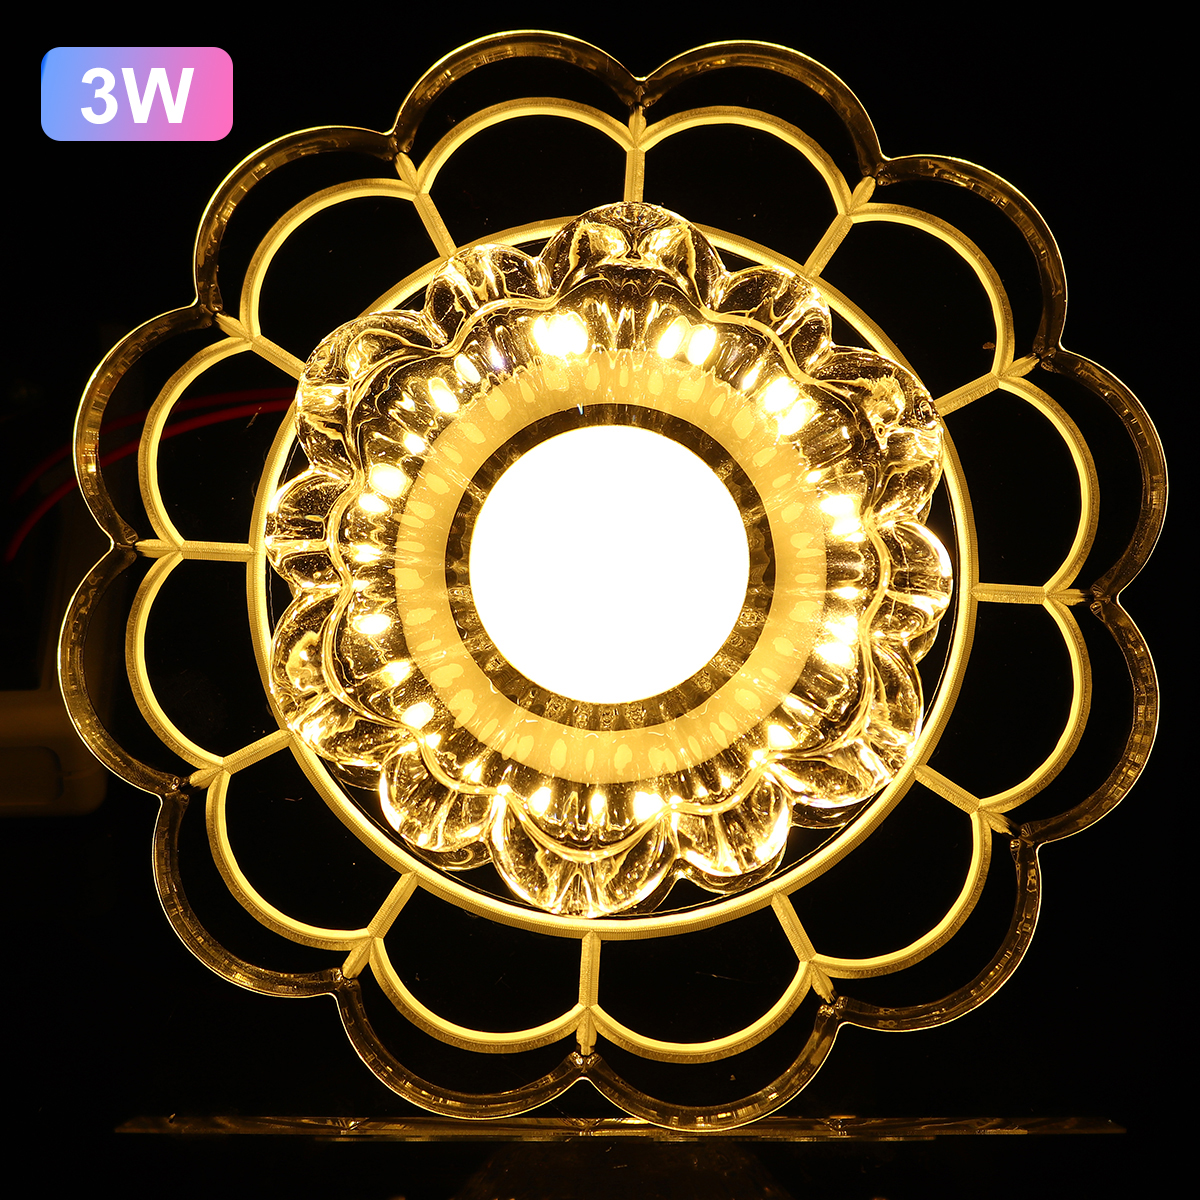 35W-79-LED-Crystal-Ceiling-Light-Ultra-Thin-Flush-Mount-Kitchen-Home-Fixture-1697198-3